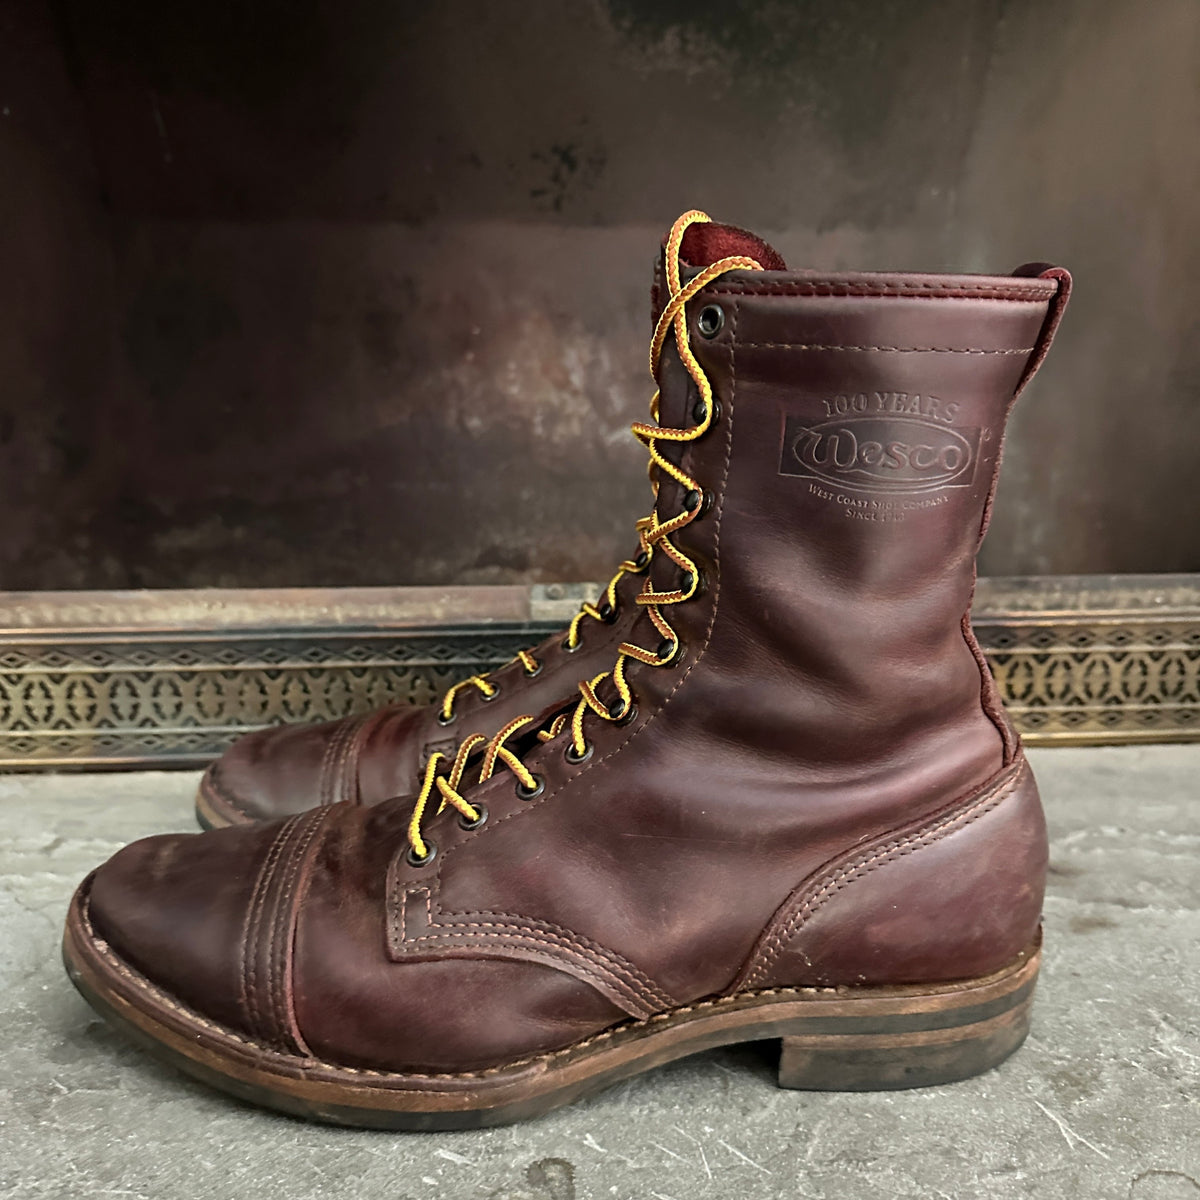 Handmade Boots for Men at SARTORIALE